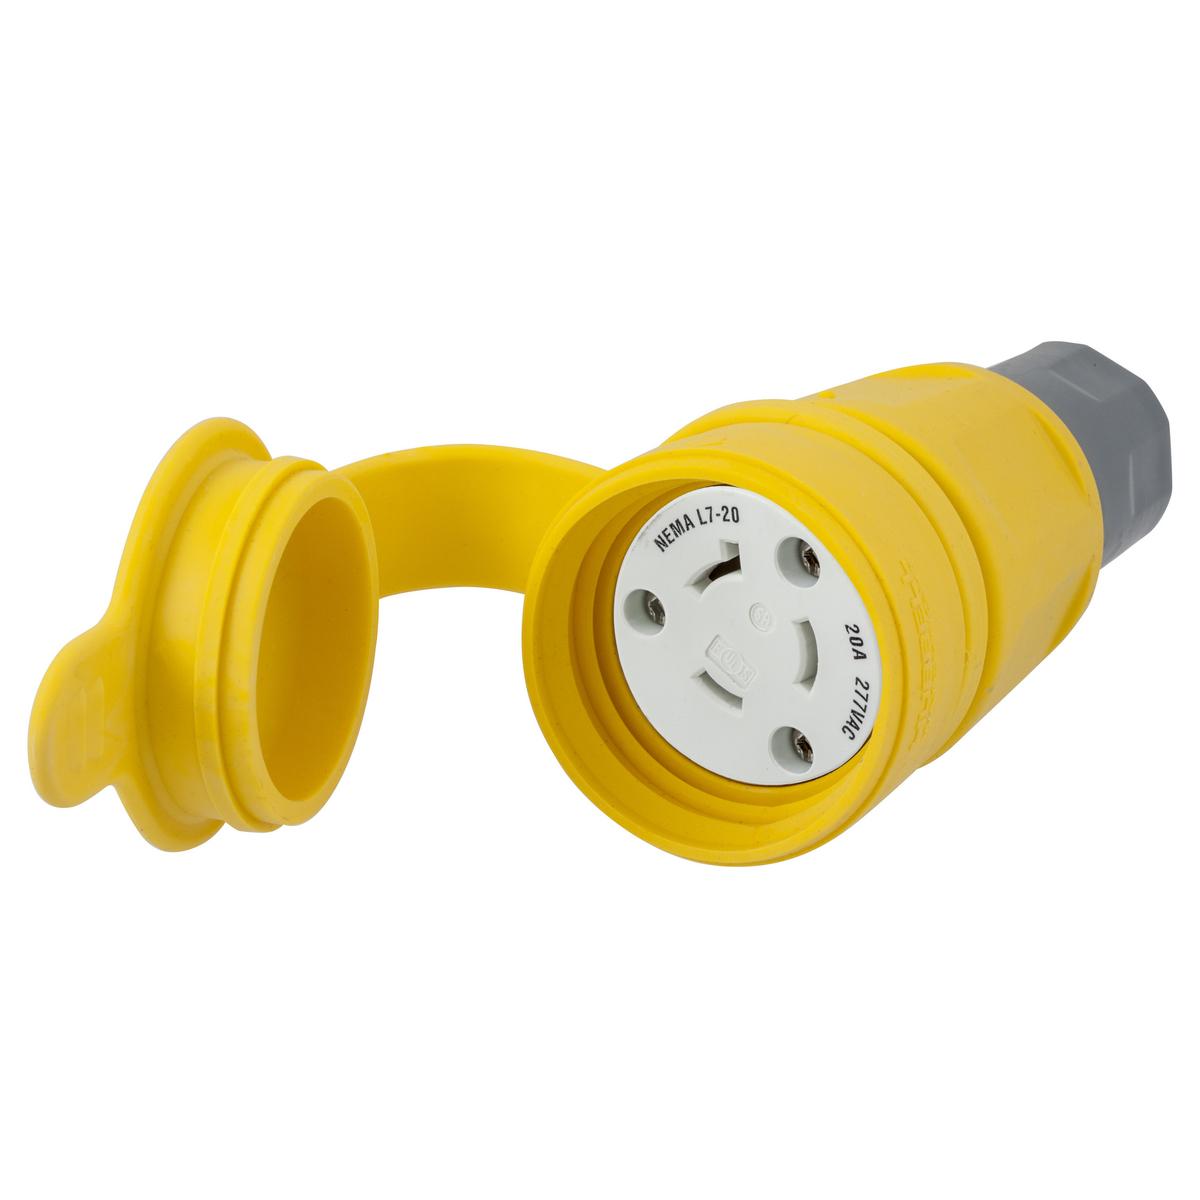 Hubbell HBL27W49 Watertight Devices, Twist-Lock® Connector, 20A, 277V AC, 2 Pole, 3 Wire, Thermoplastic elastomer, NEMA L7-20R, Yellow  ; Smooth body design minimizes collection points simplifying the wash down process ; Strain relief nut always seals on the body, minimiz